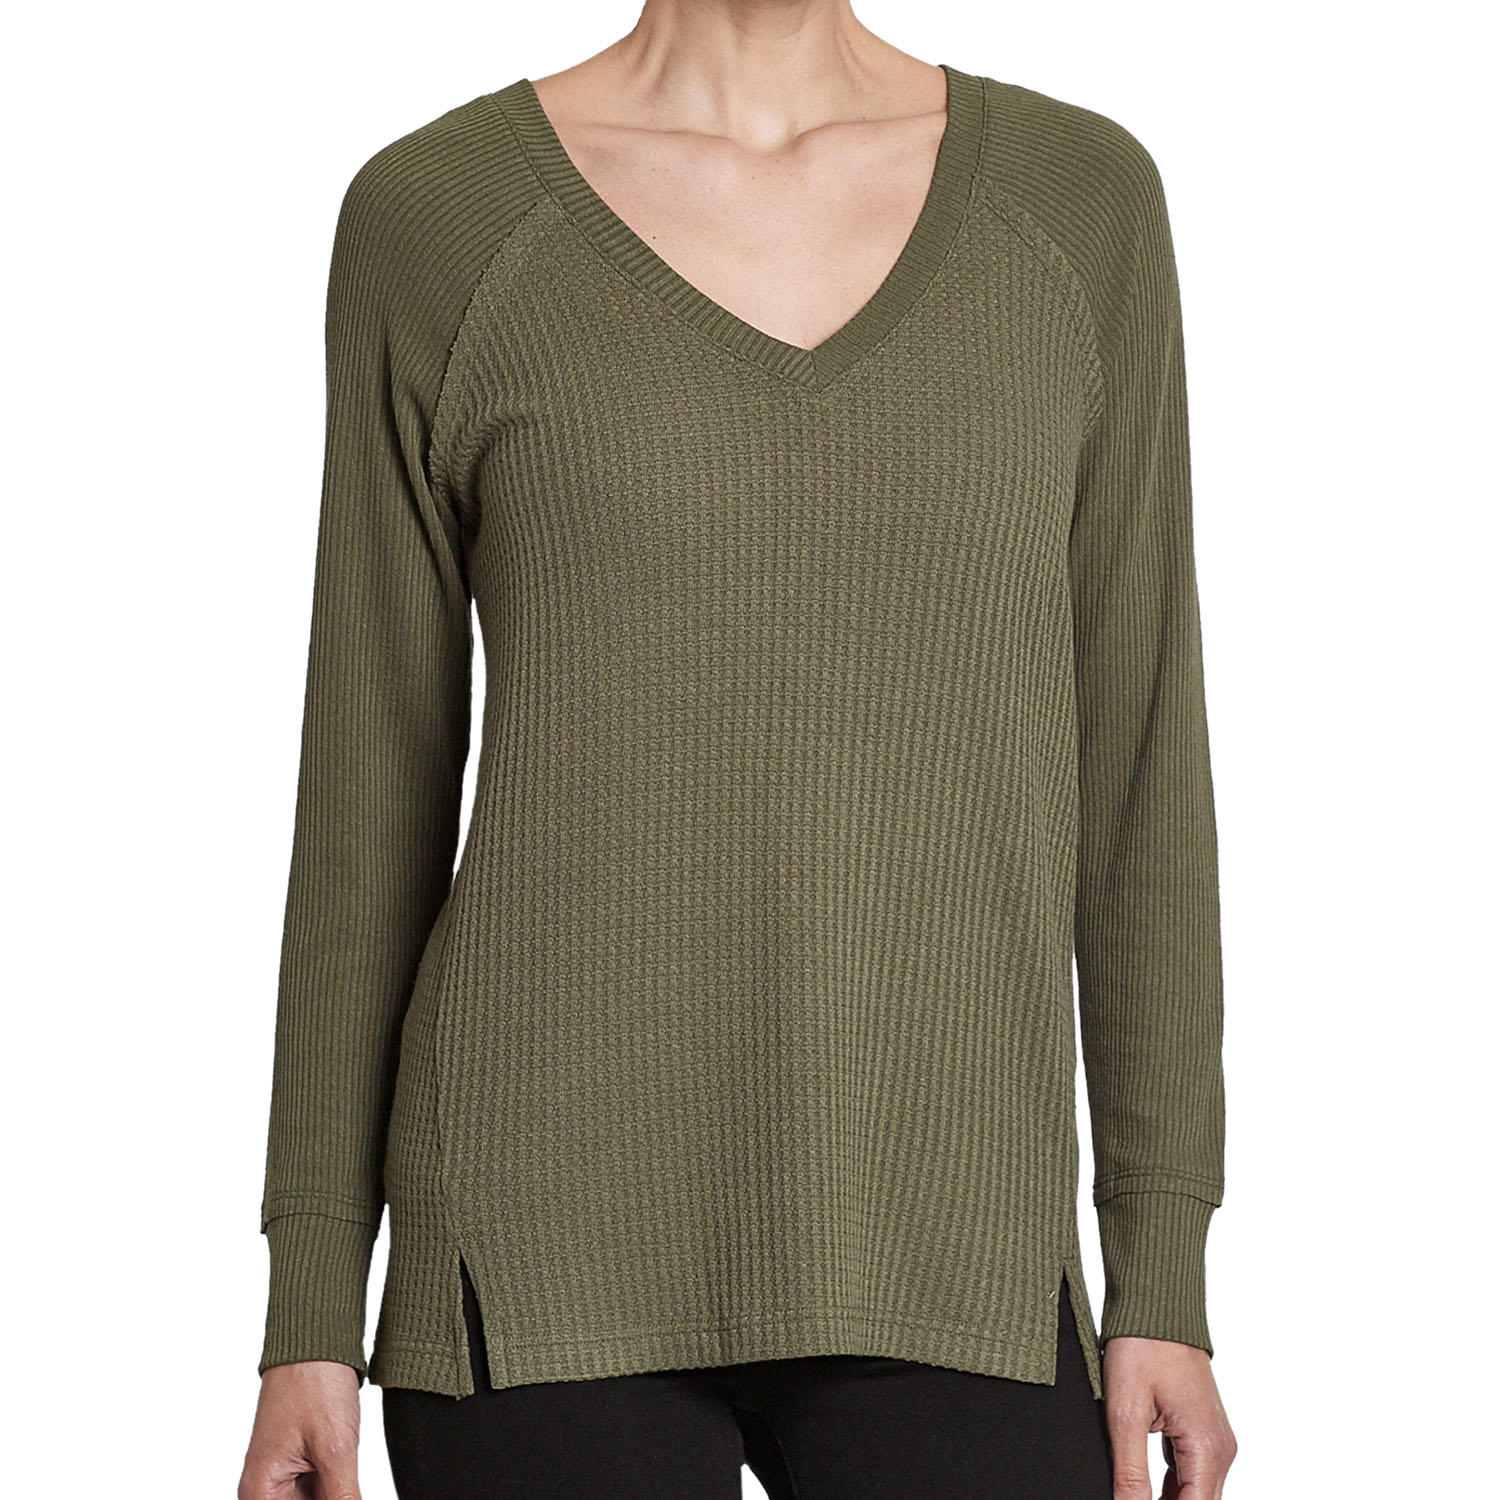 Candt Women S Long Sleeve Waffle Knit Top Olive Green Small Ebay